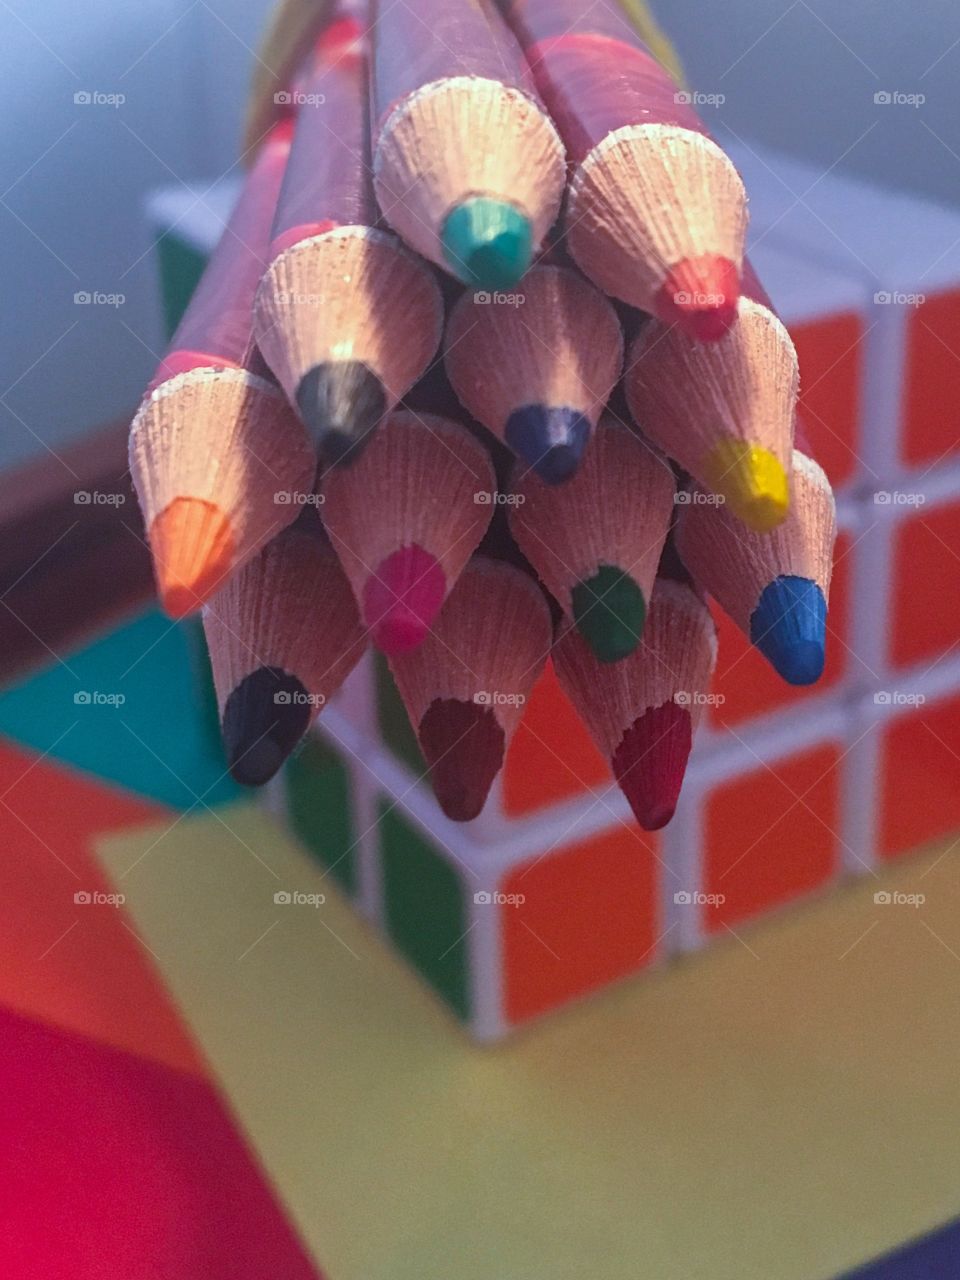 Origami, magic cube and many colors